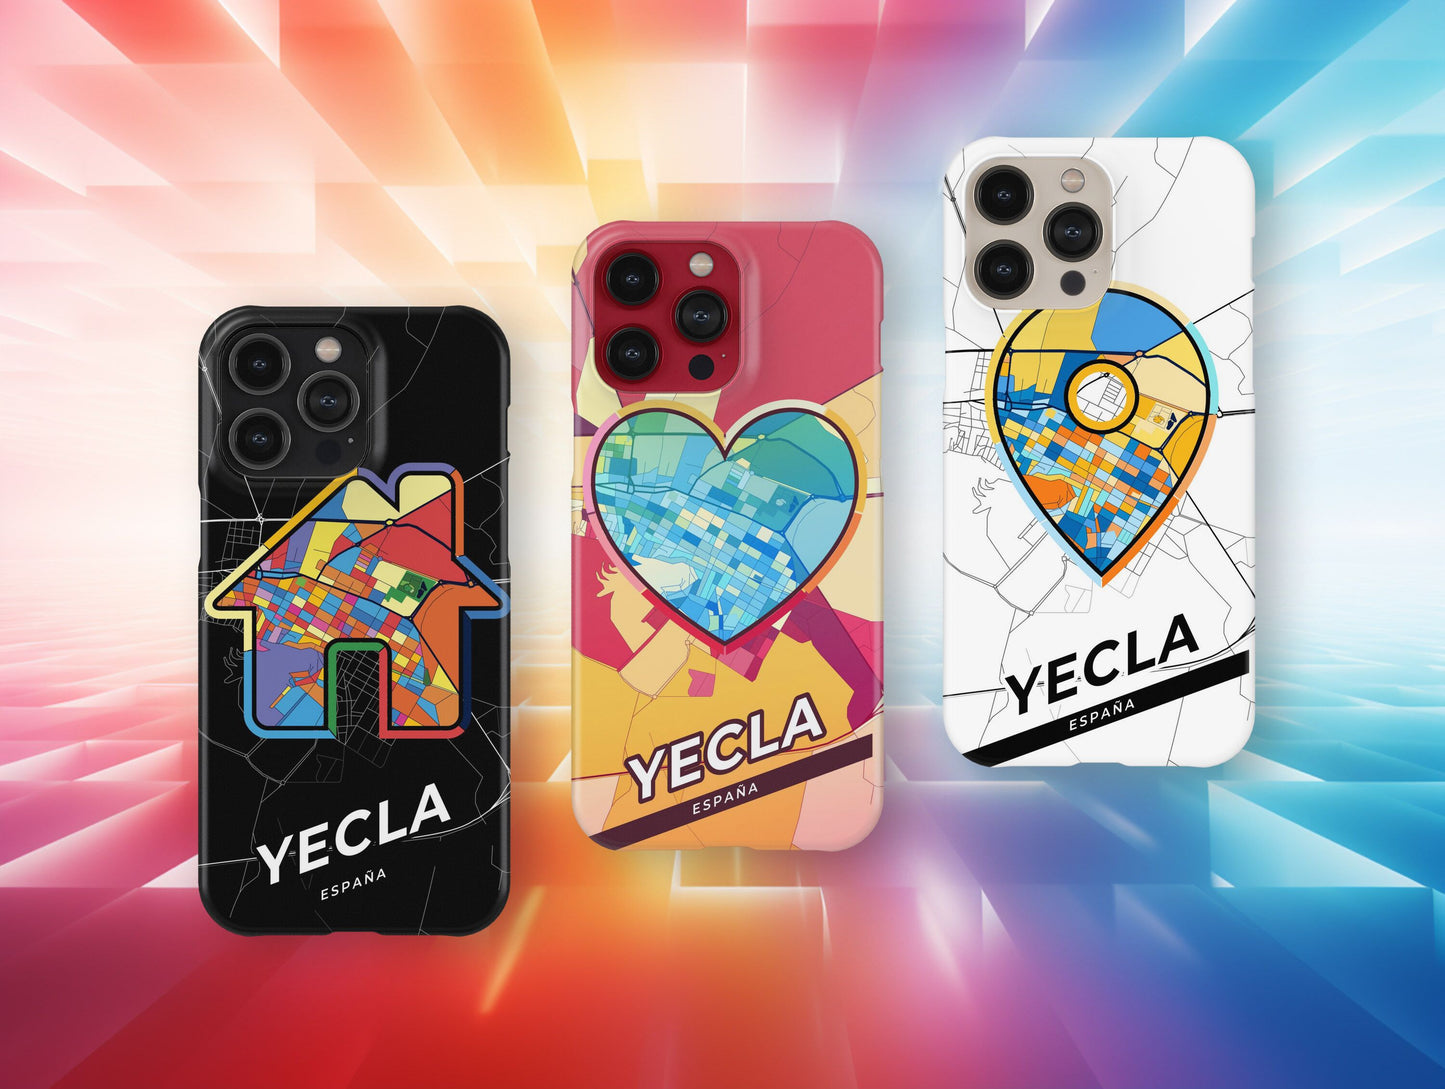 Yecla Spain slim phone case with colorful icon